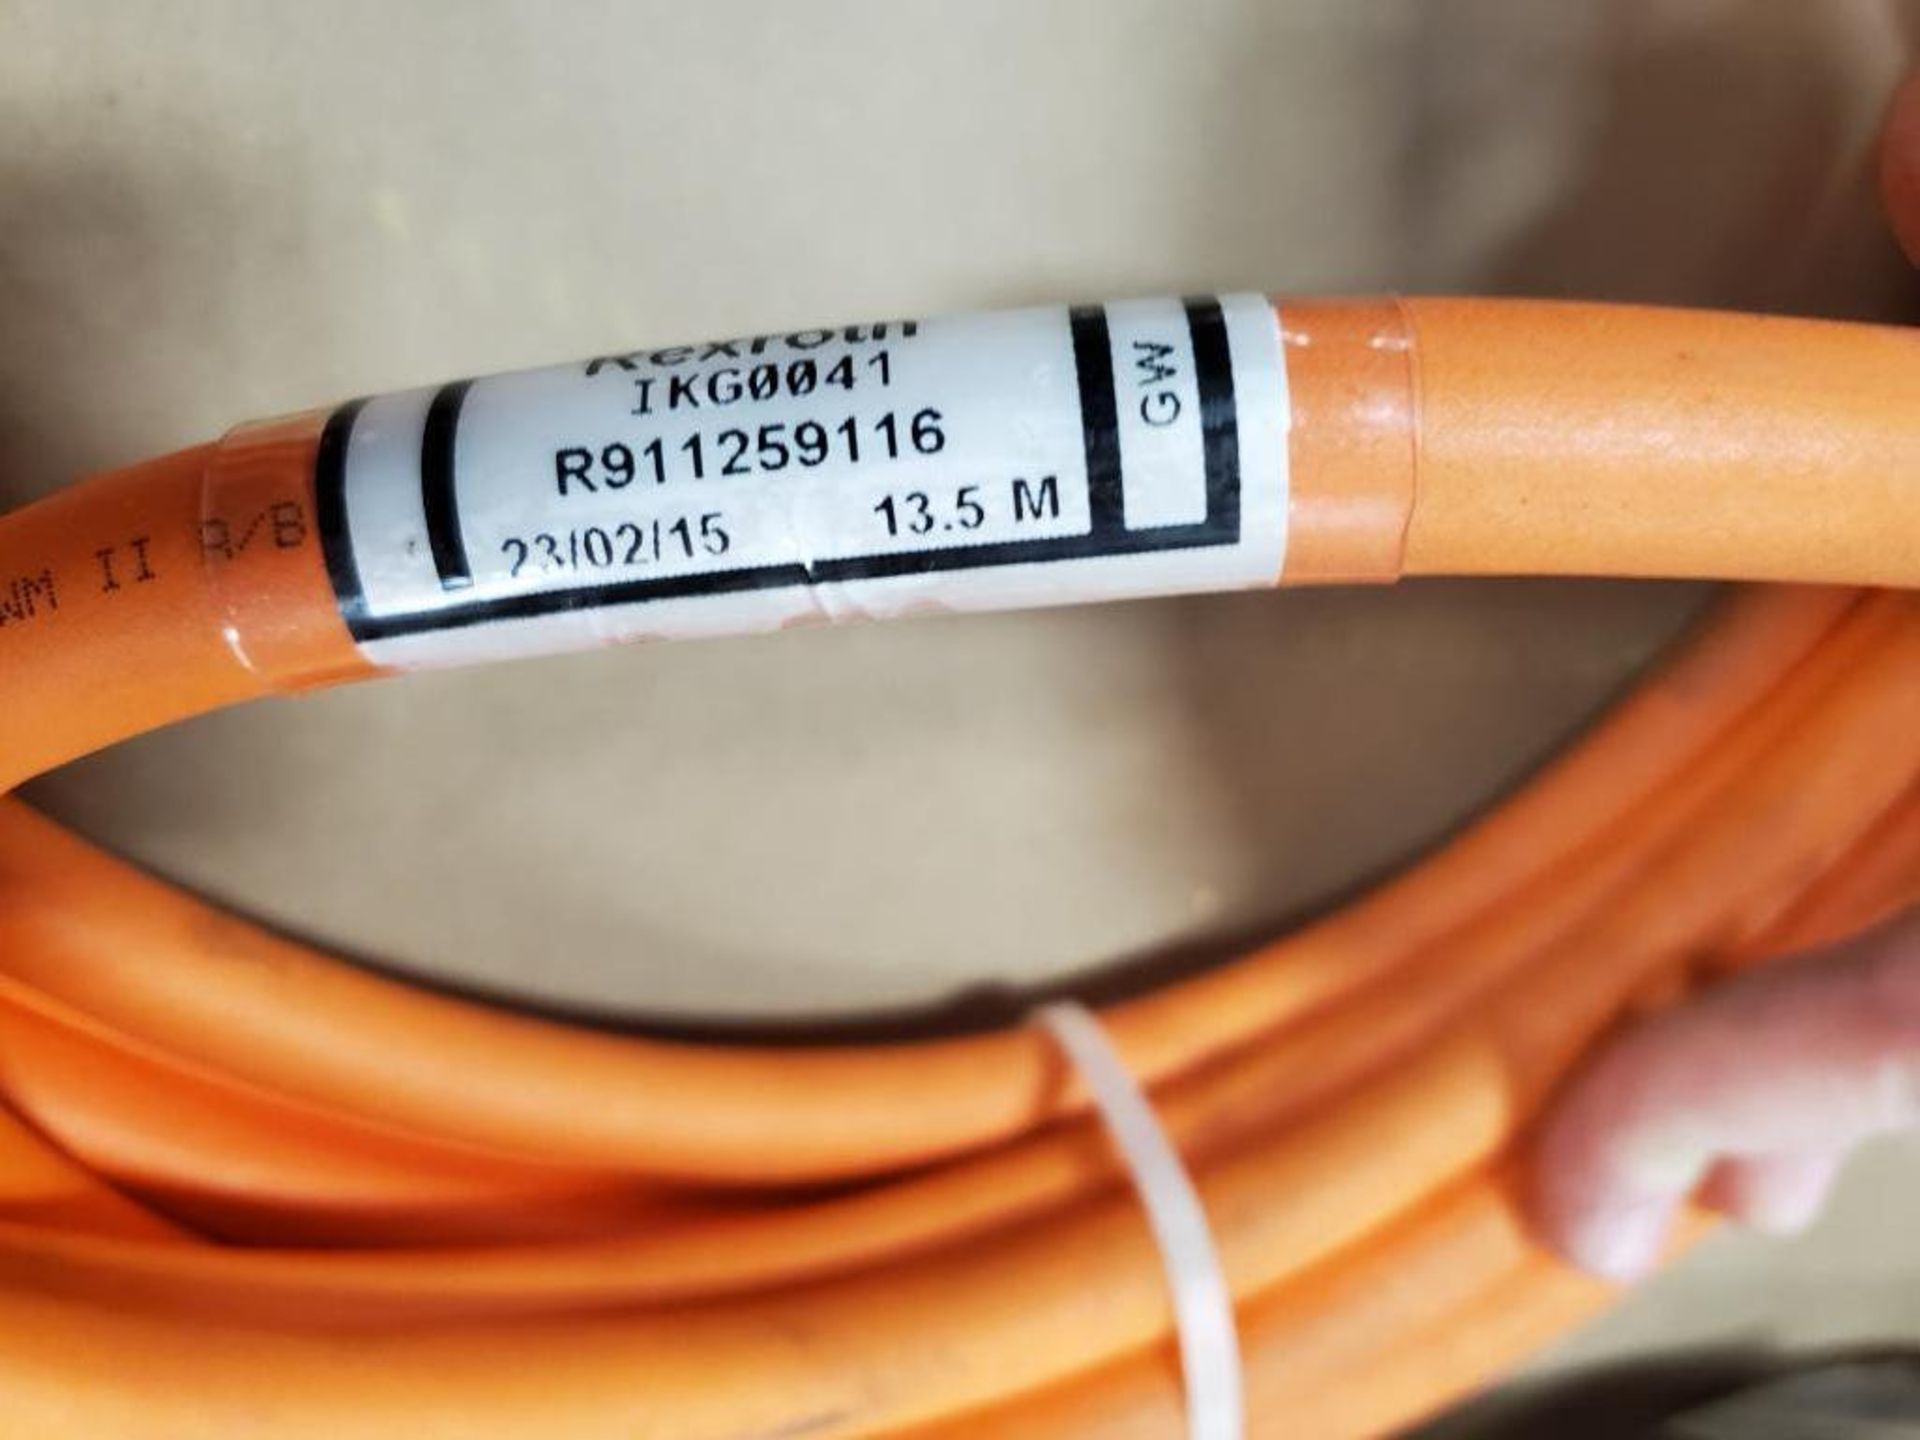 Rexroth IKG0041 R911259116 connection cable. - Image 6 of 7